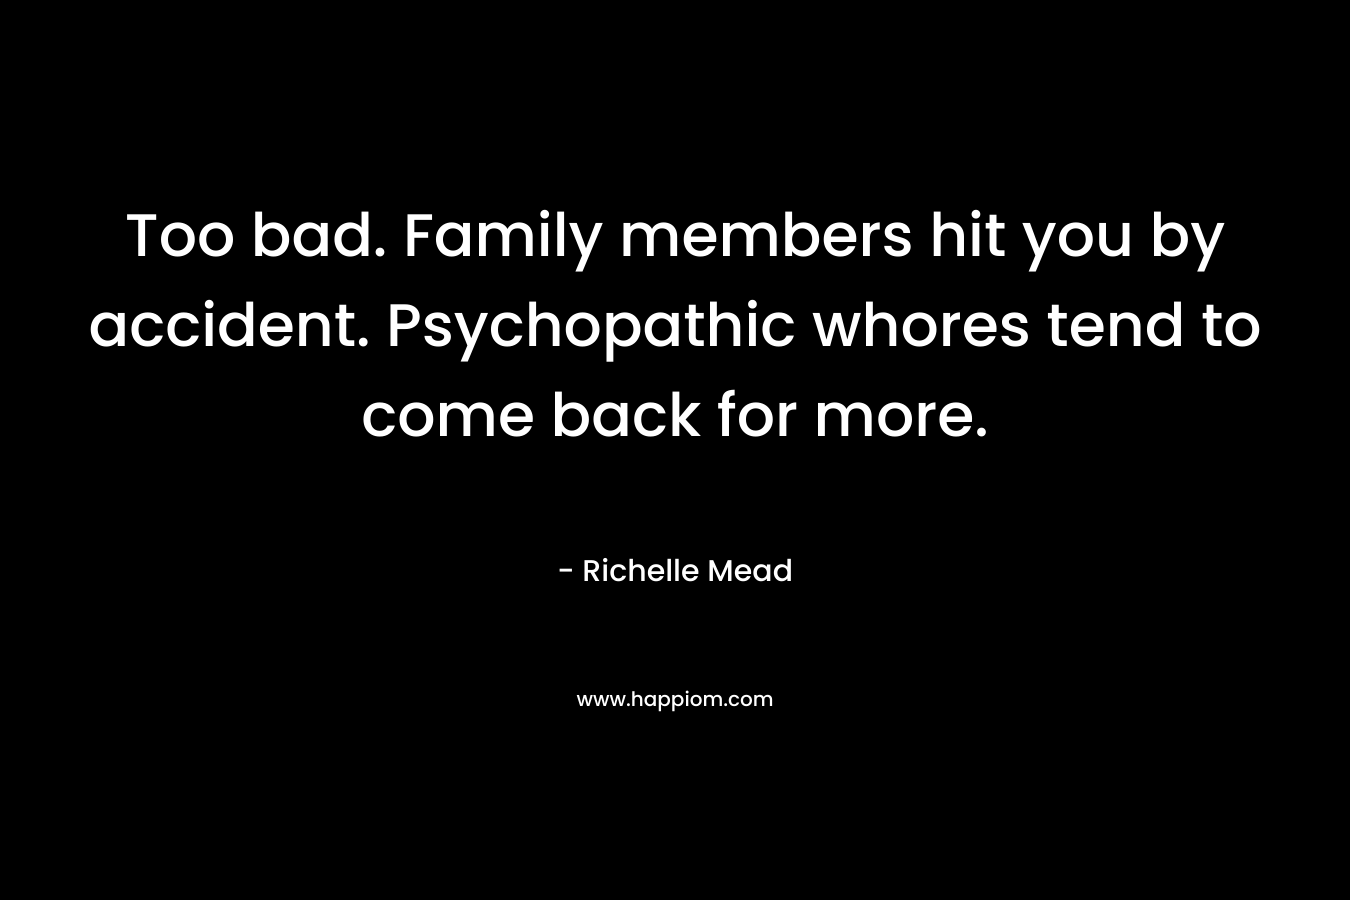 Too bad. Family members hit you by accident. Psychopathic whores tend to come back for more.